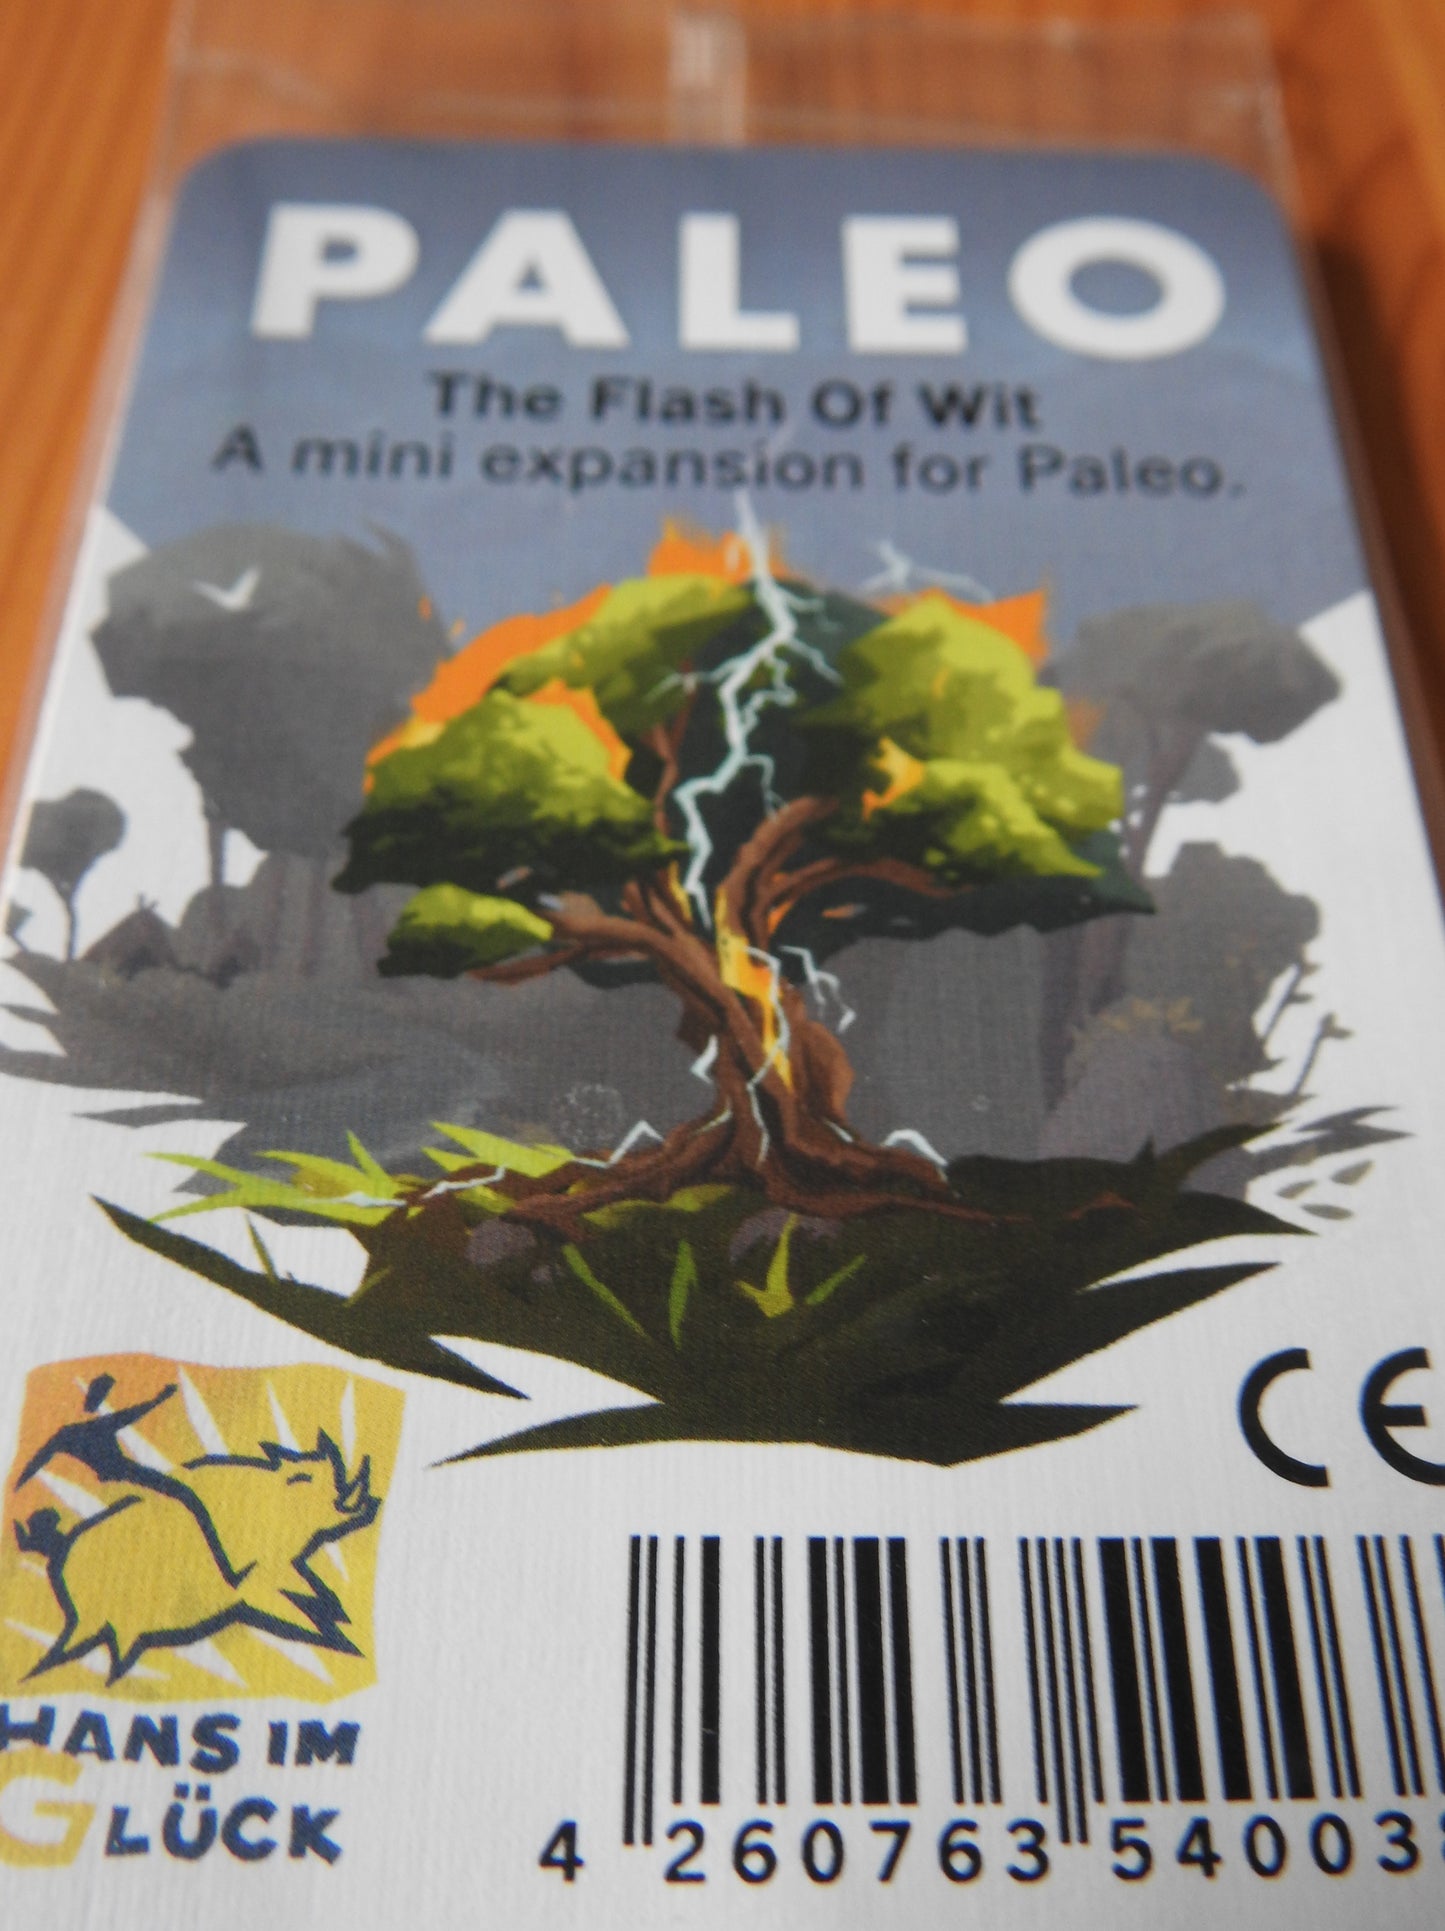 Closer look at the font card, showing thunder splitting a tree for this Paleo Flash of Wit mini expansion.